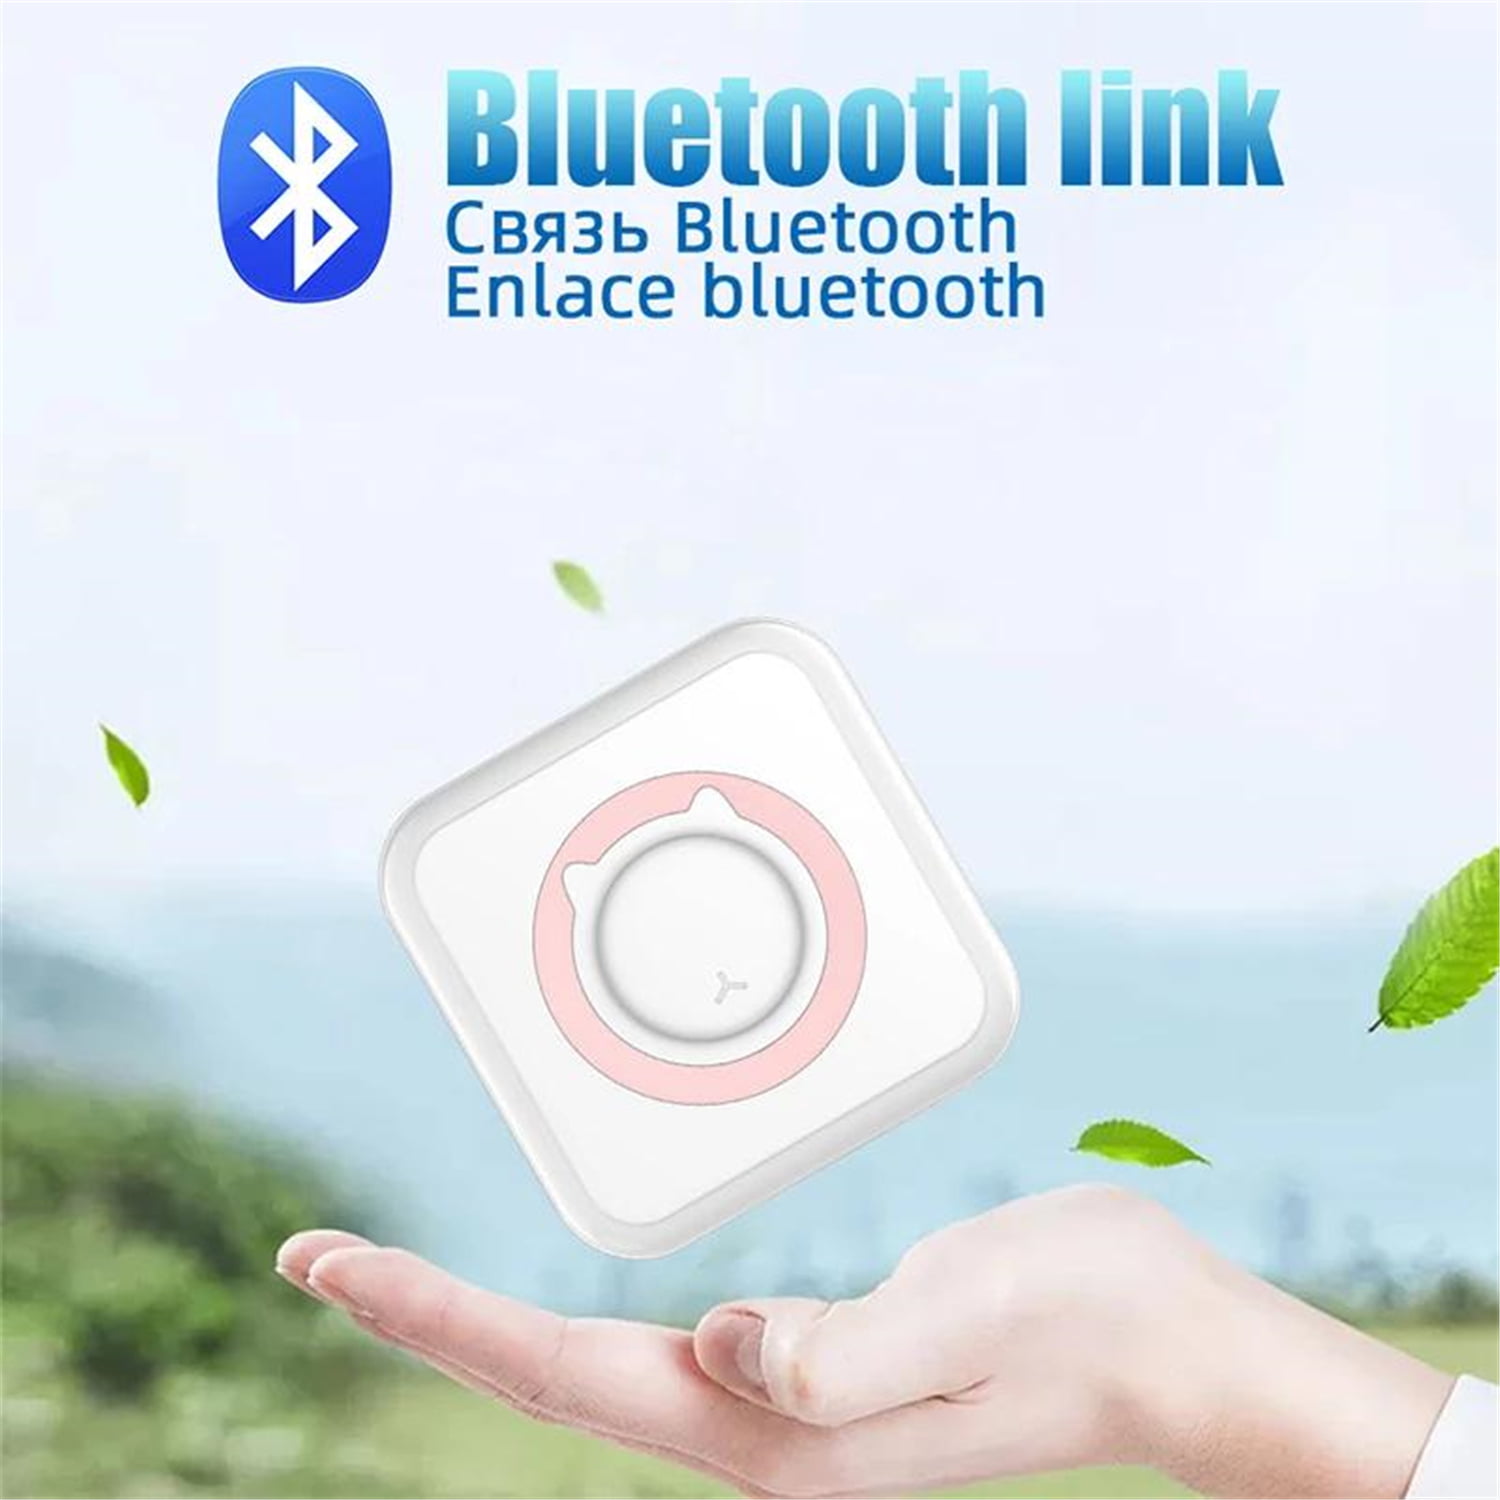 Mini Printer, Auniq Bluetooth Pocket Thermal Printer Inkless Portable  Sticker Printer Compatible with iOS and Android, Wireless Photo Printer for